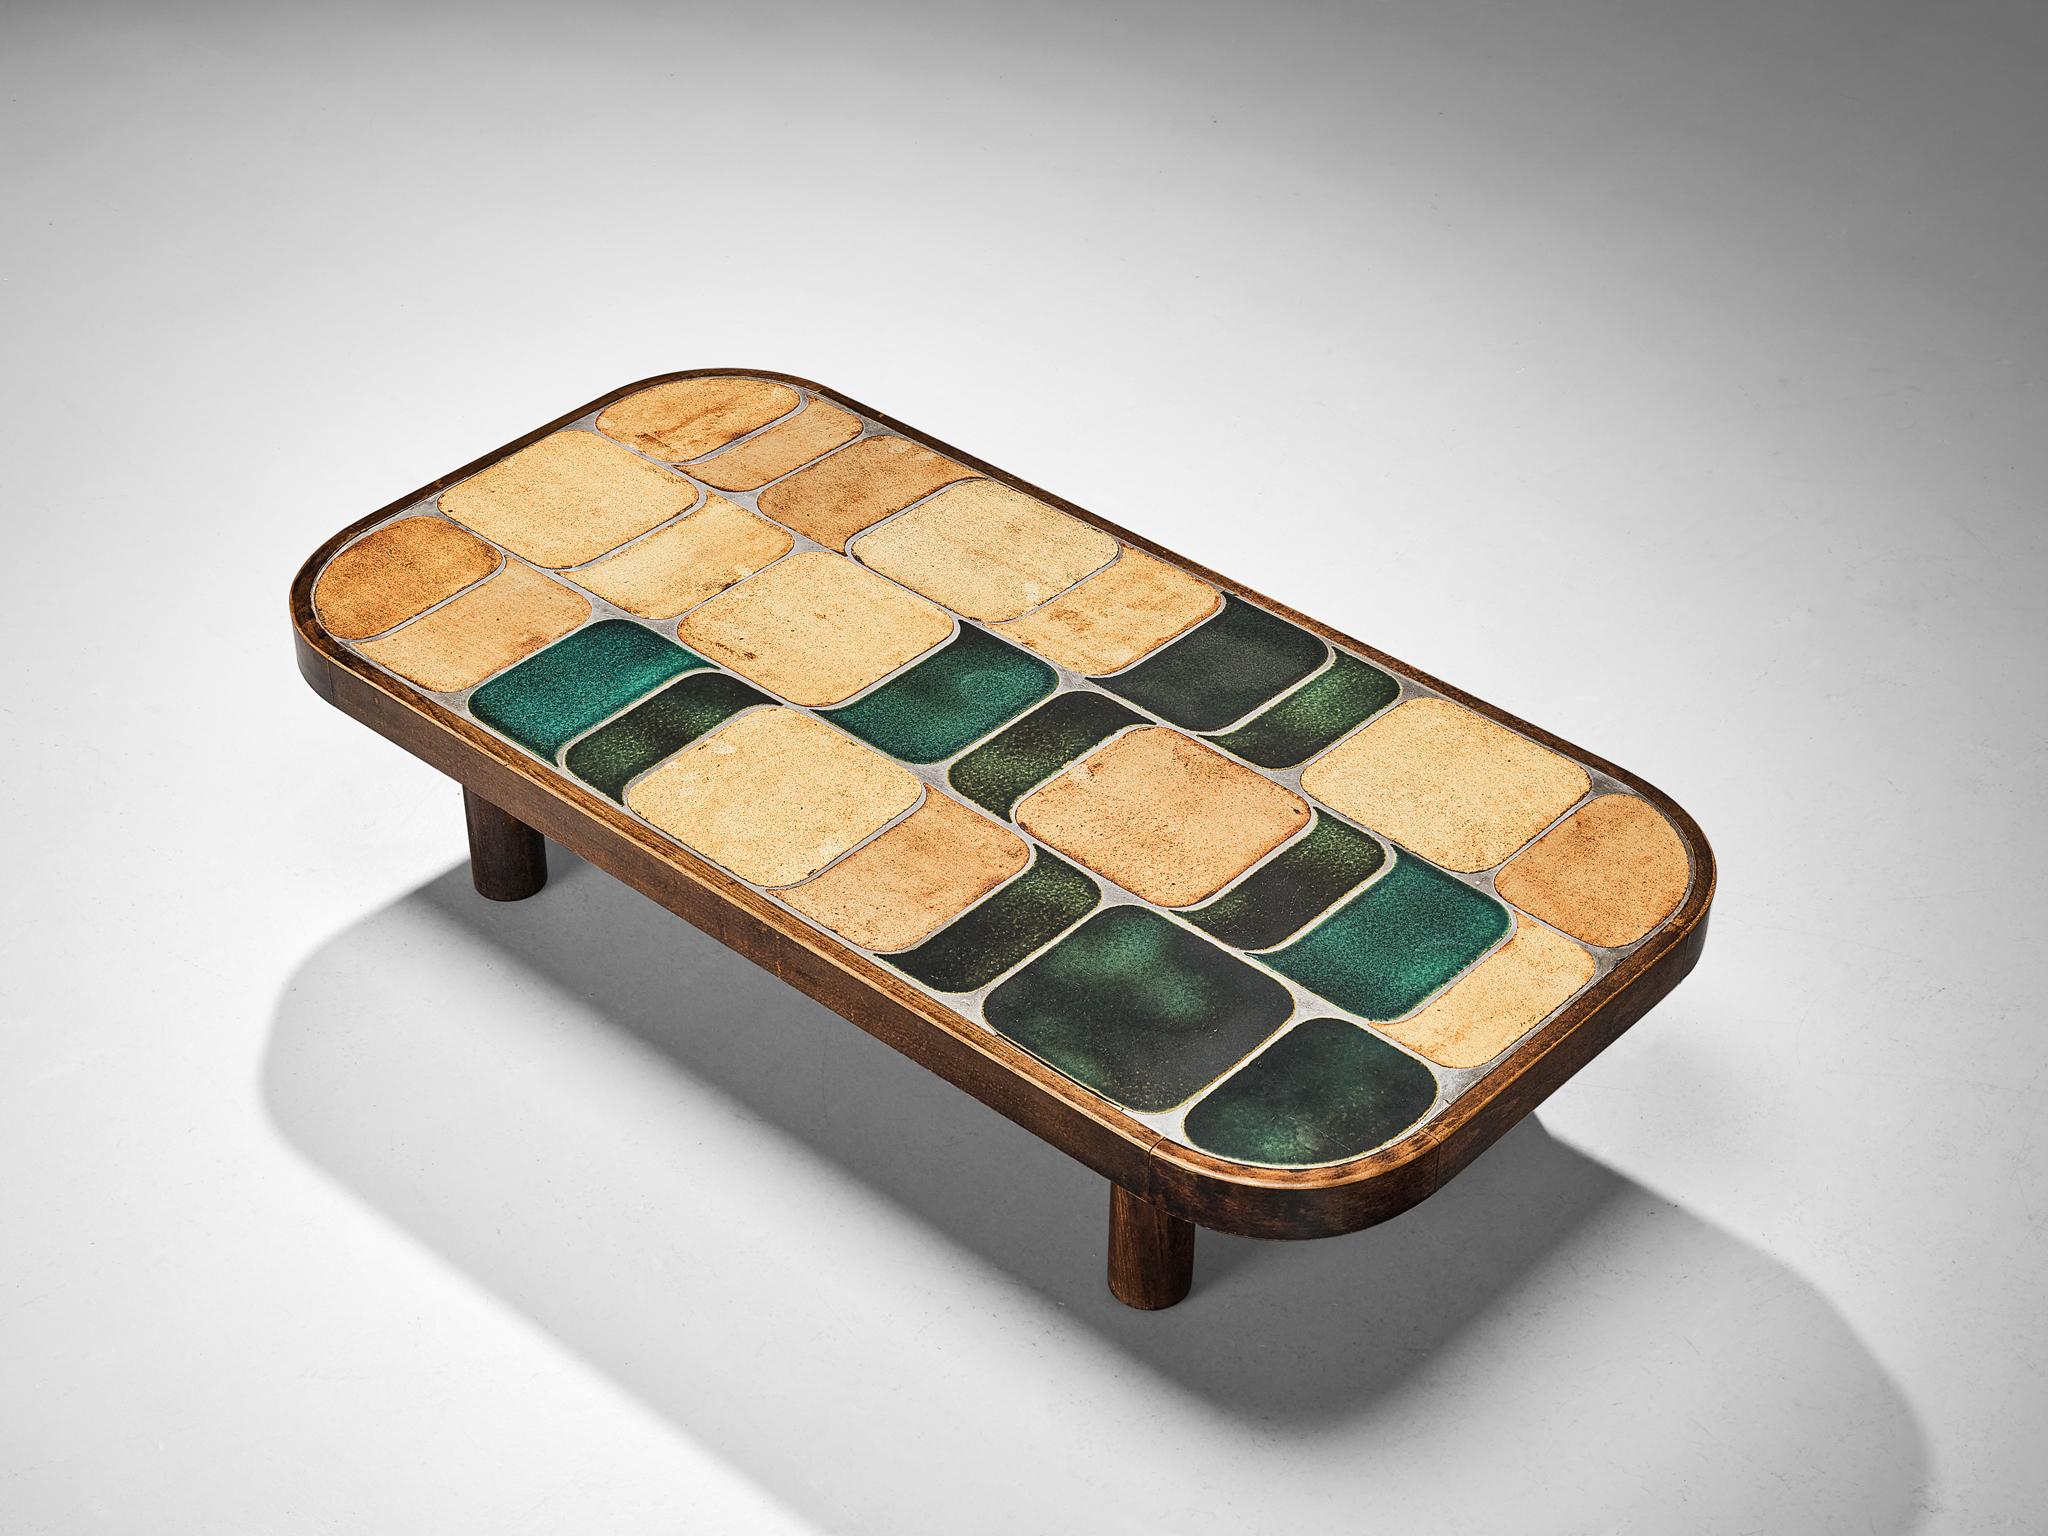 Roger Capron, coffee table, ceramic, stained beech, France, 1960s

French coffee table with wonderful composed ceramic tiles by French designer Roger Capron. Both the tiles as well as the frame feature rounded corners. The tiles have different